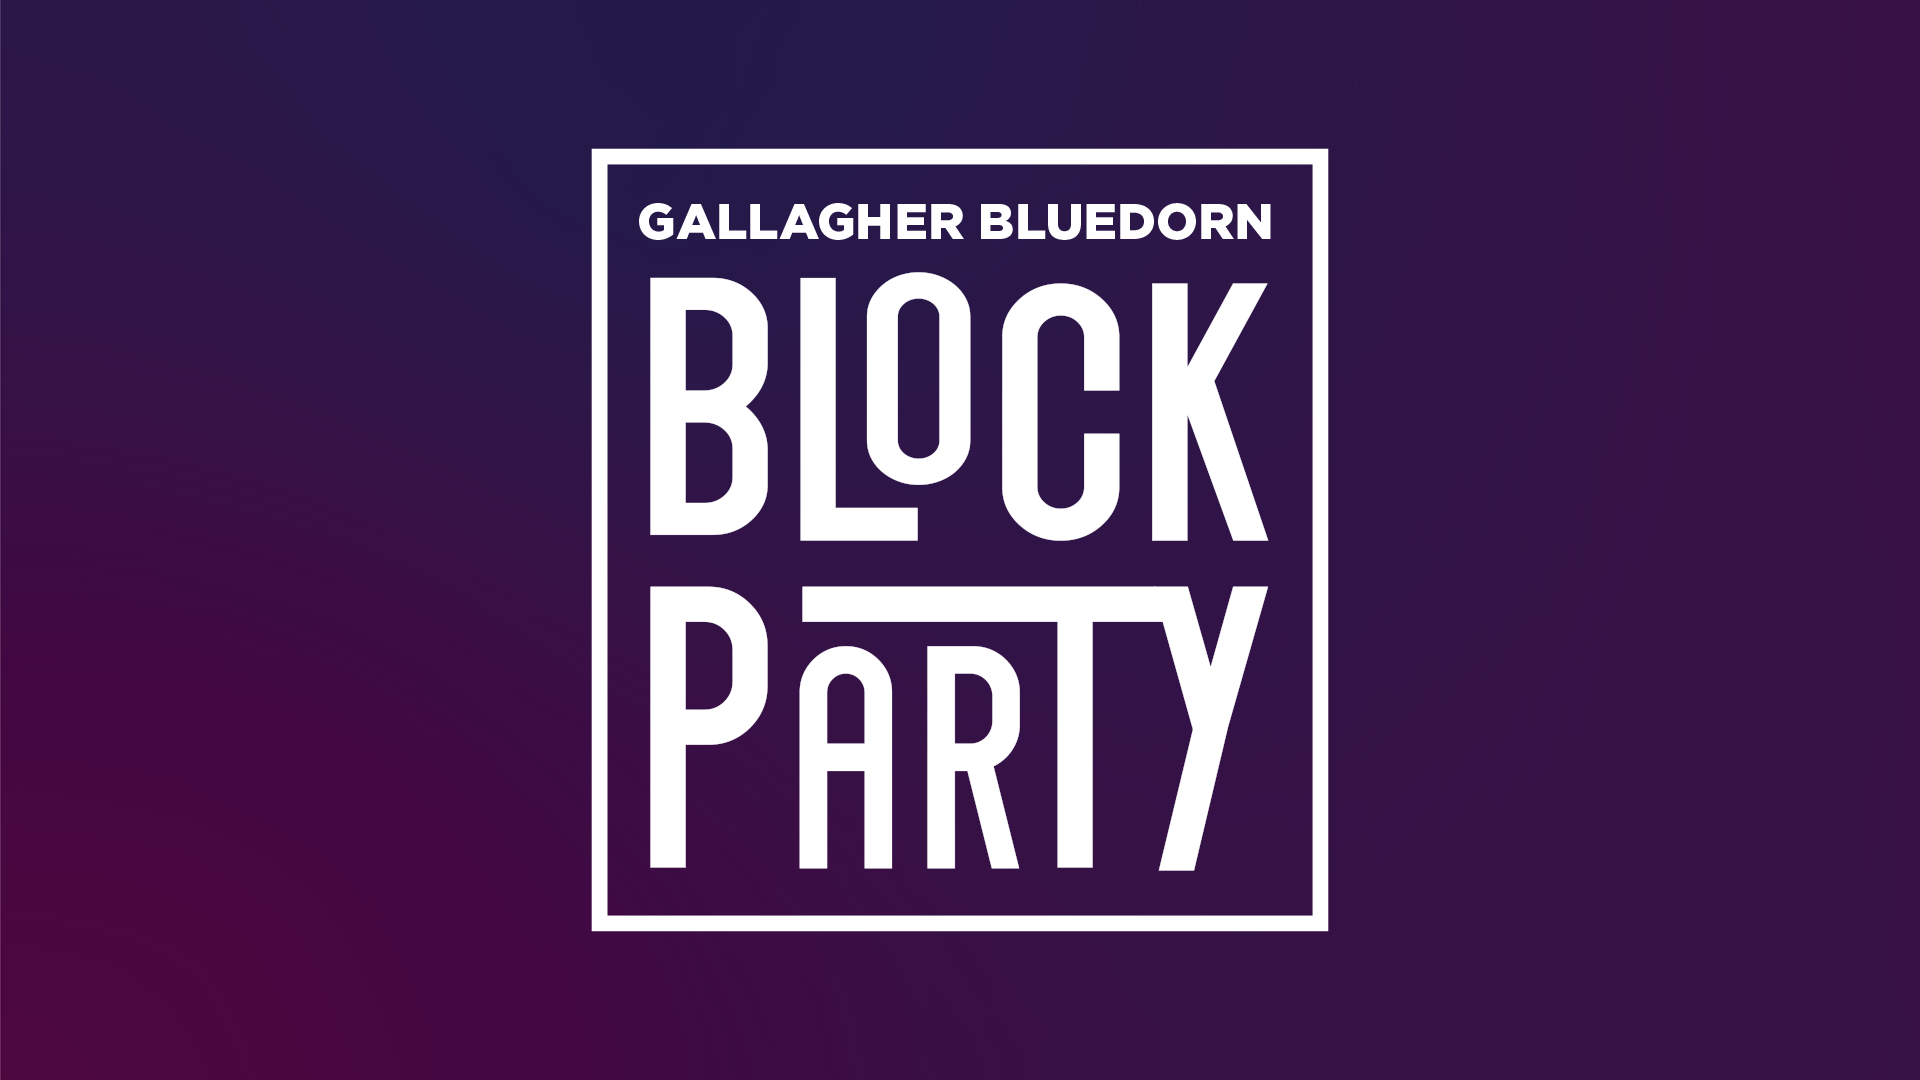 White text that reads Gallagher Bluedorn Block Party on a purple gradient